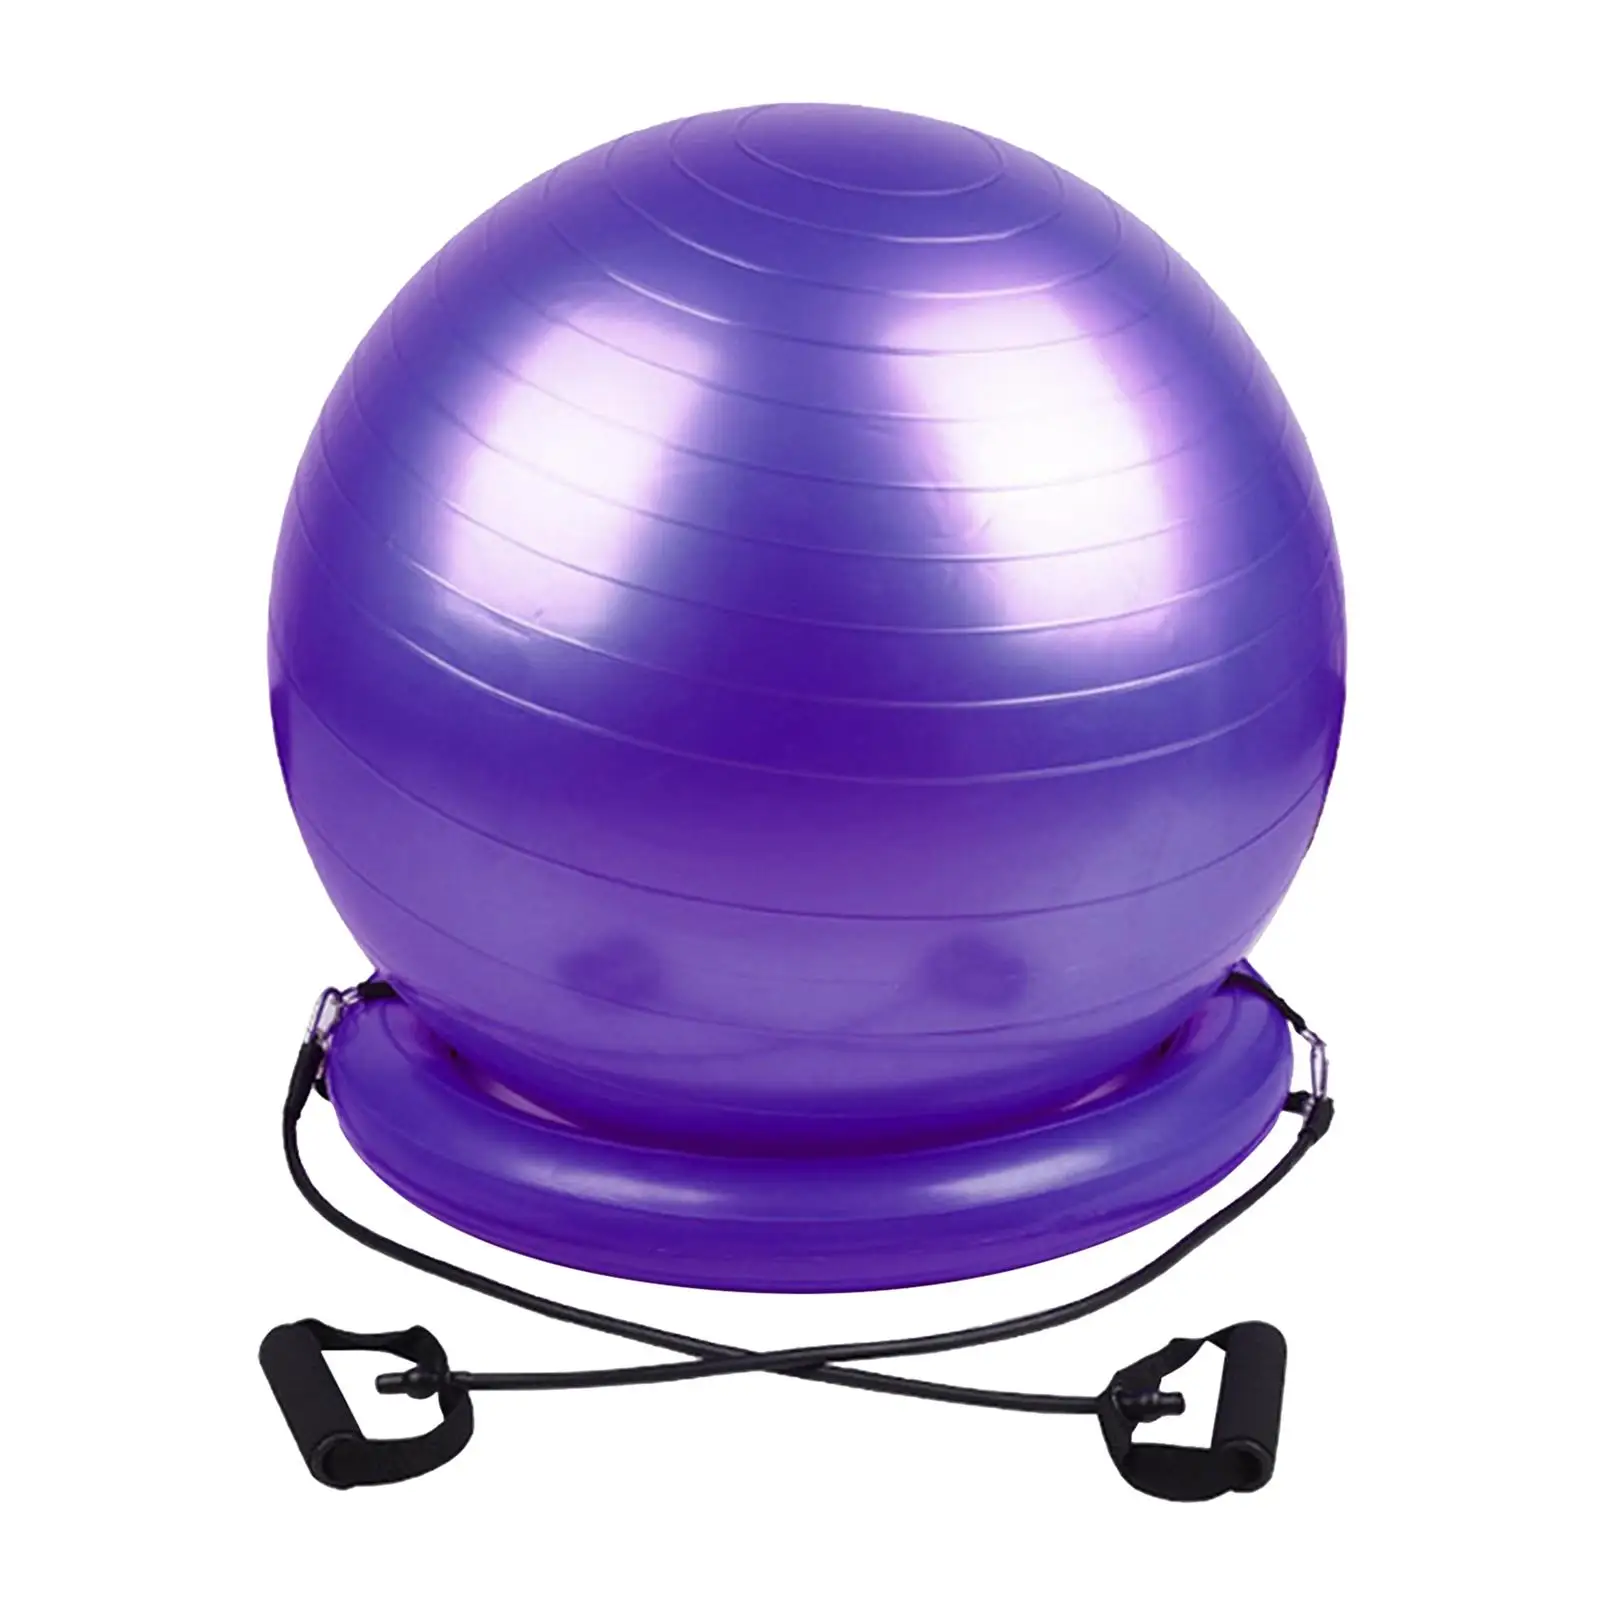 Exercise Ball -Stability  Ball with  Base, Resistance Bands And Pump, for Home, Office, Posture, ,